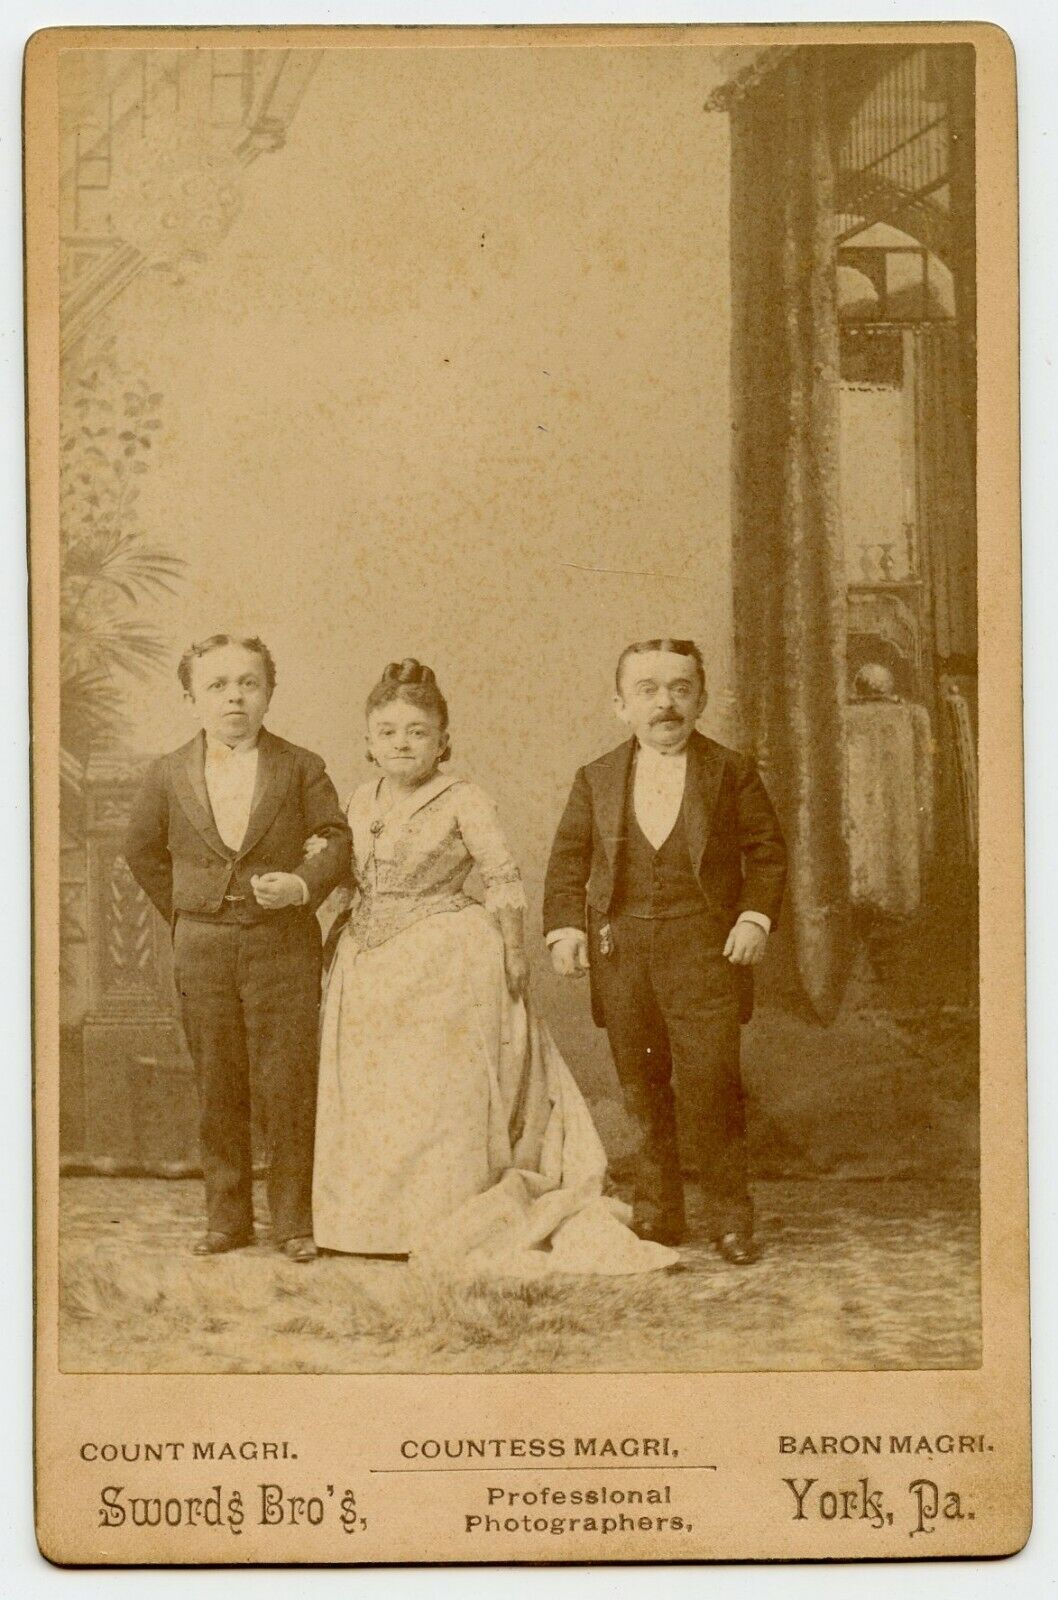 Italian Count Magri and L. Warren Photo by Swords Bros, York PA , dwarf , circus